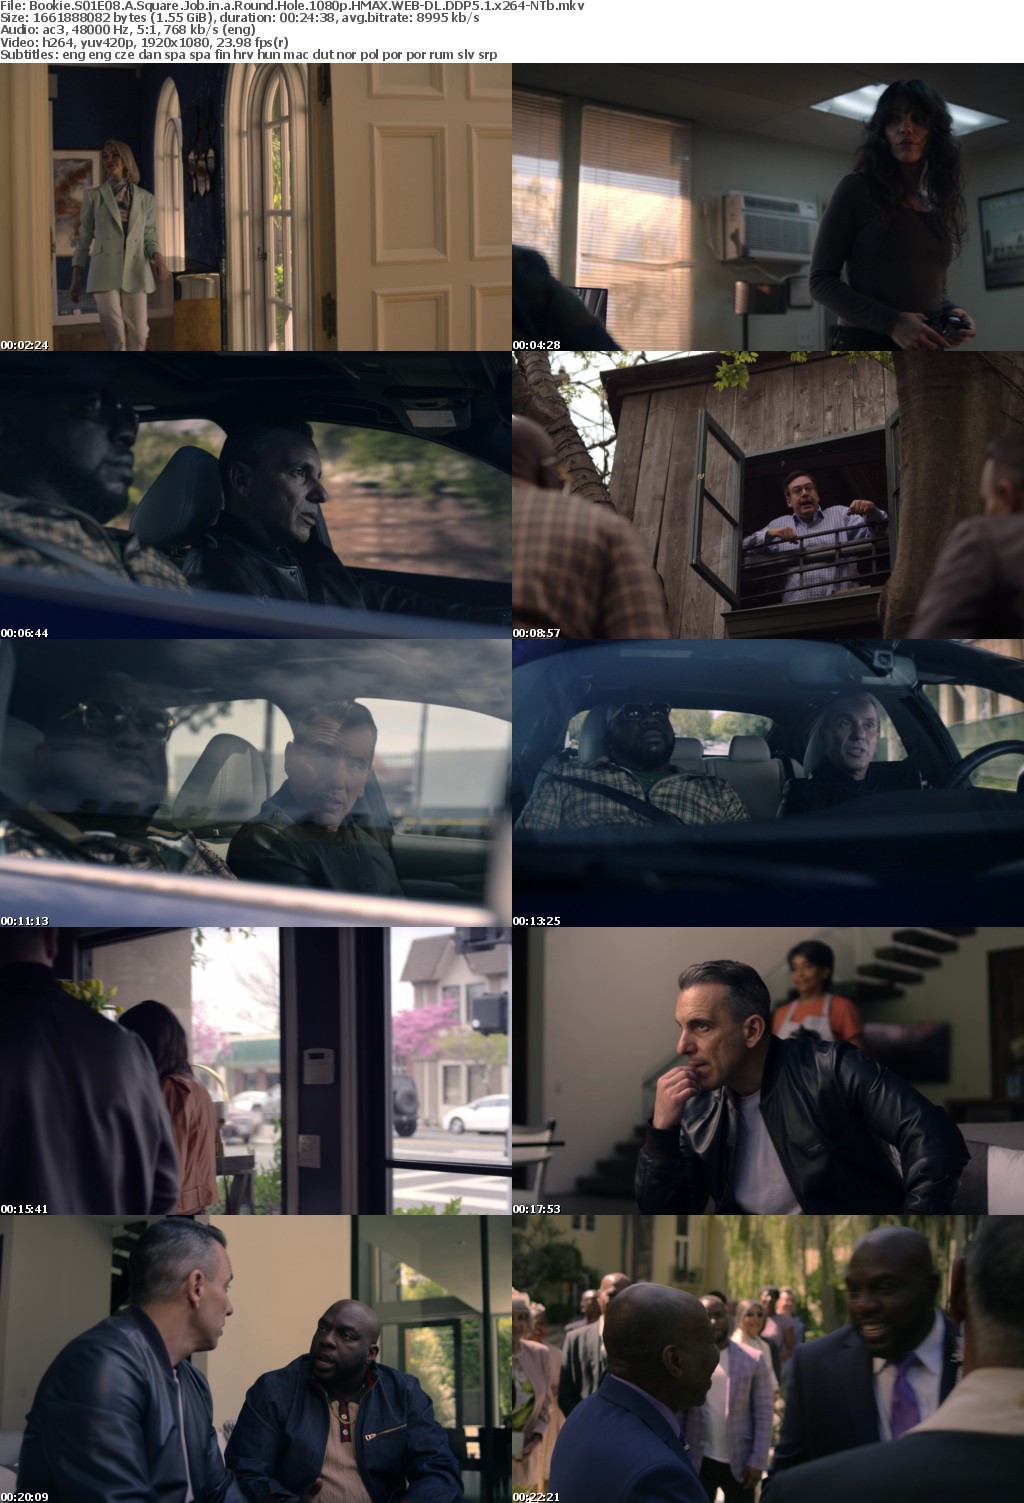 Bookie S01E08 A Square Job in a Round Hole 1080p HMAX WEB-DL DDP5 1 x264-NTb